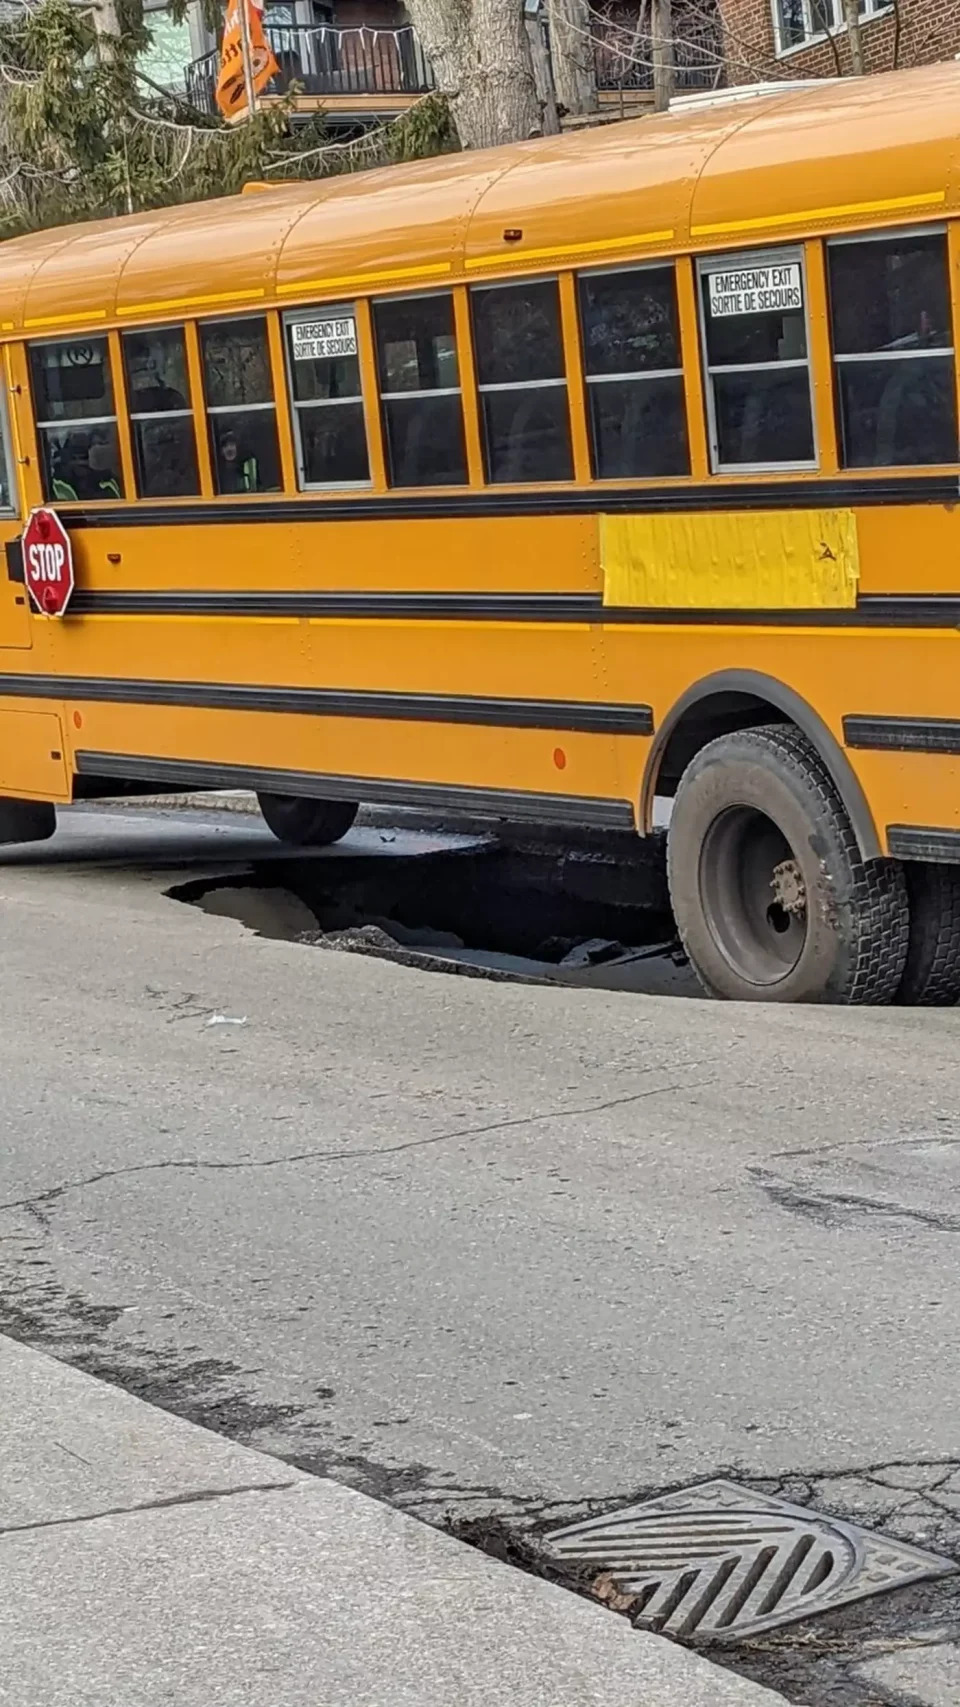 Toronto Fire is investigating after a sinkhole opened up underneath a parked school bus in the Beaches.